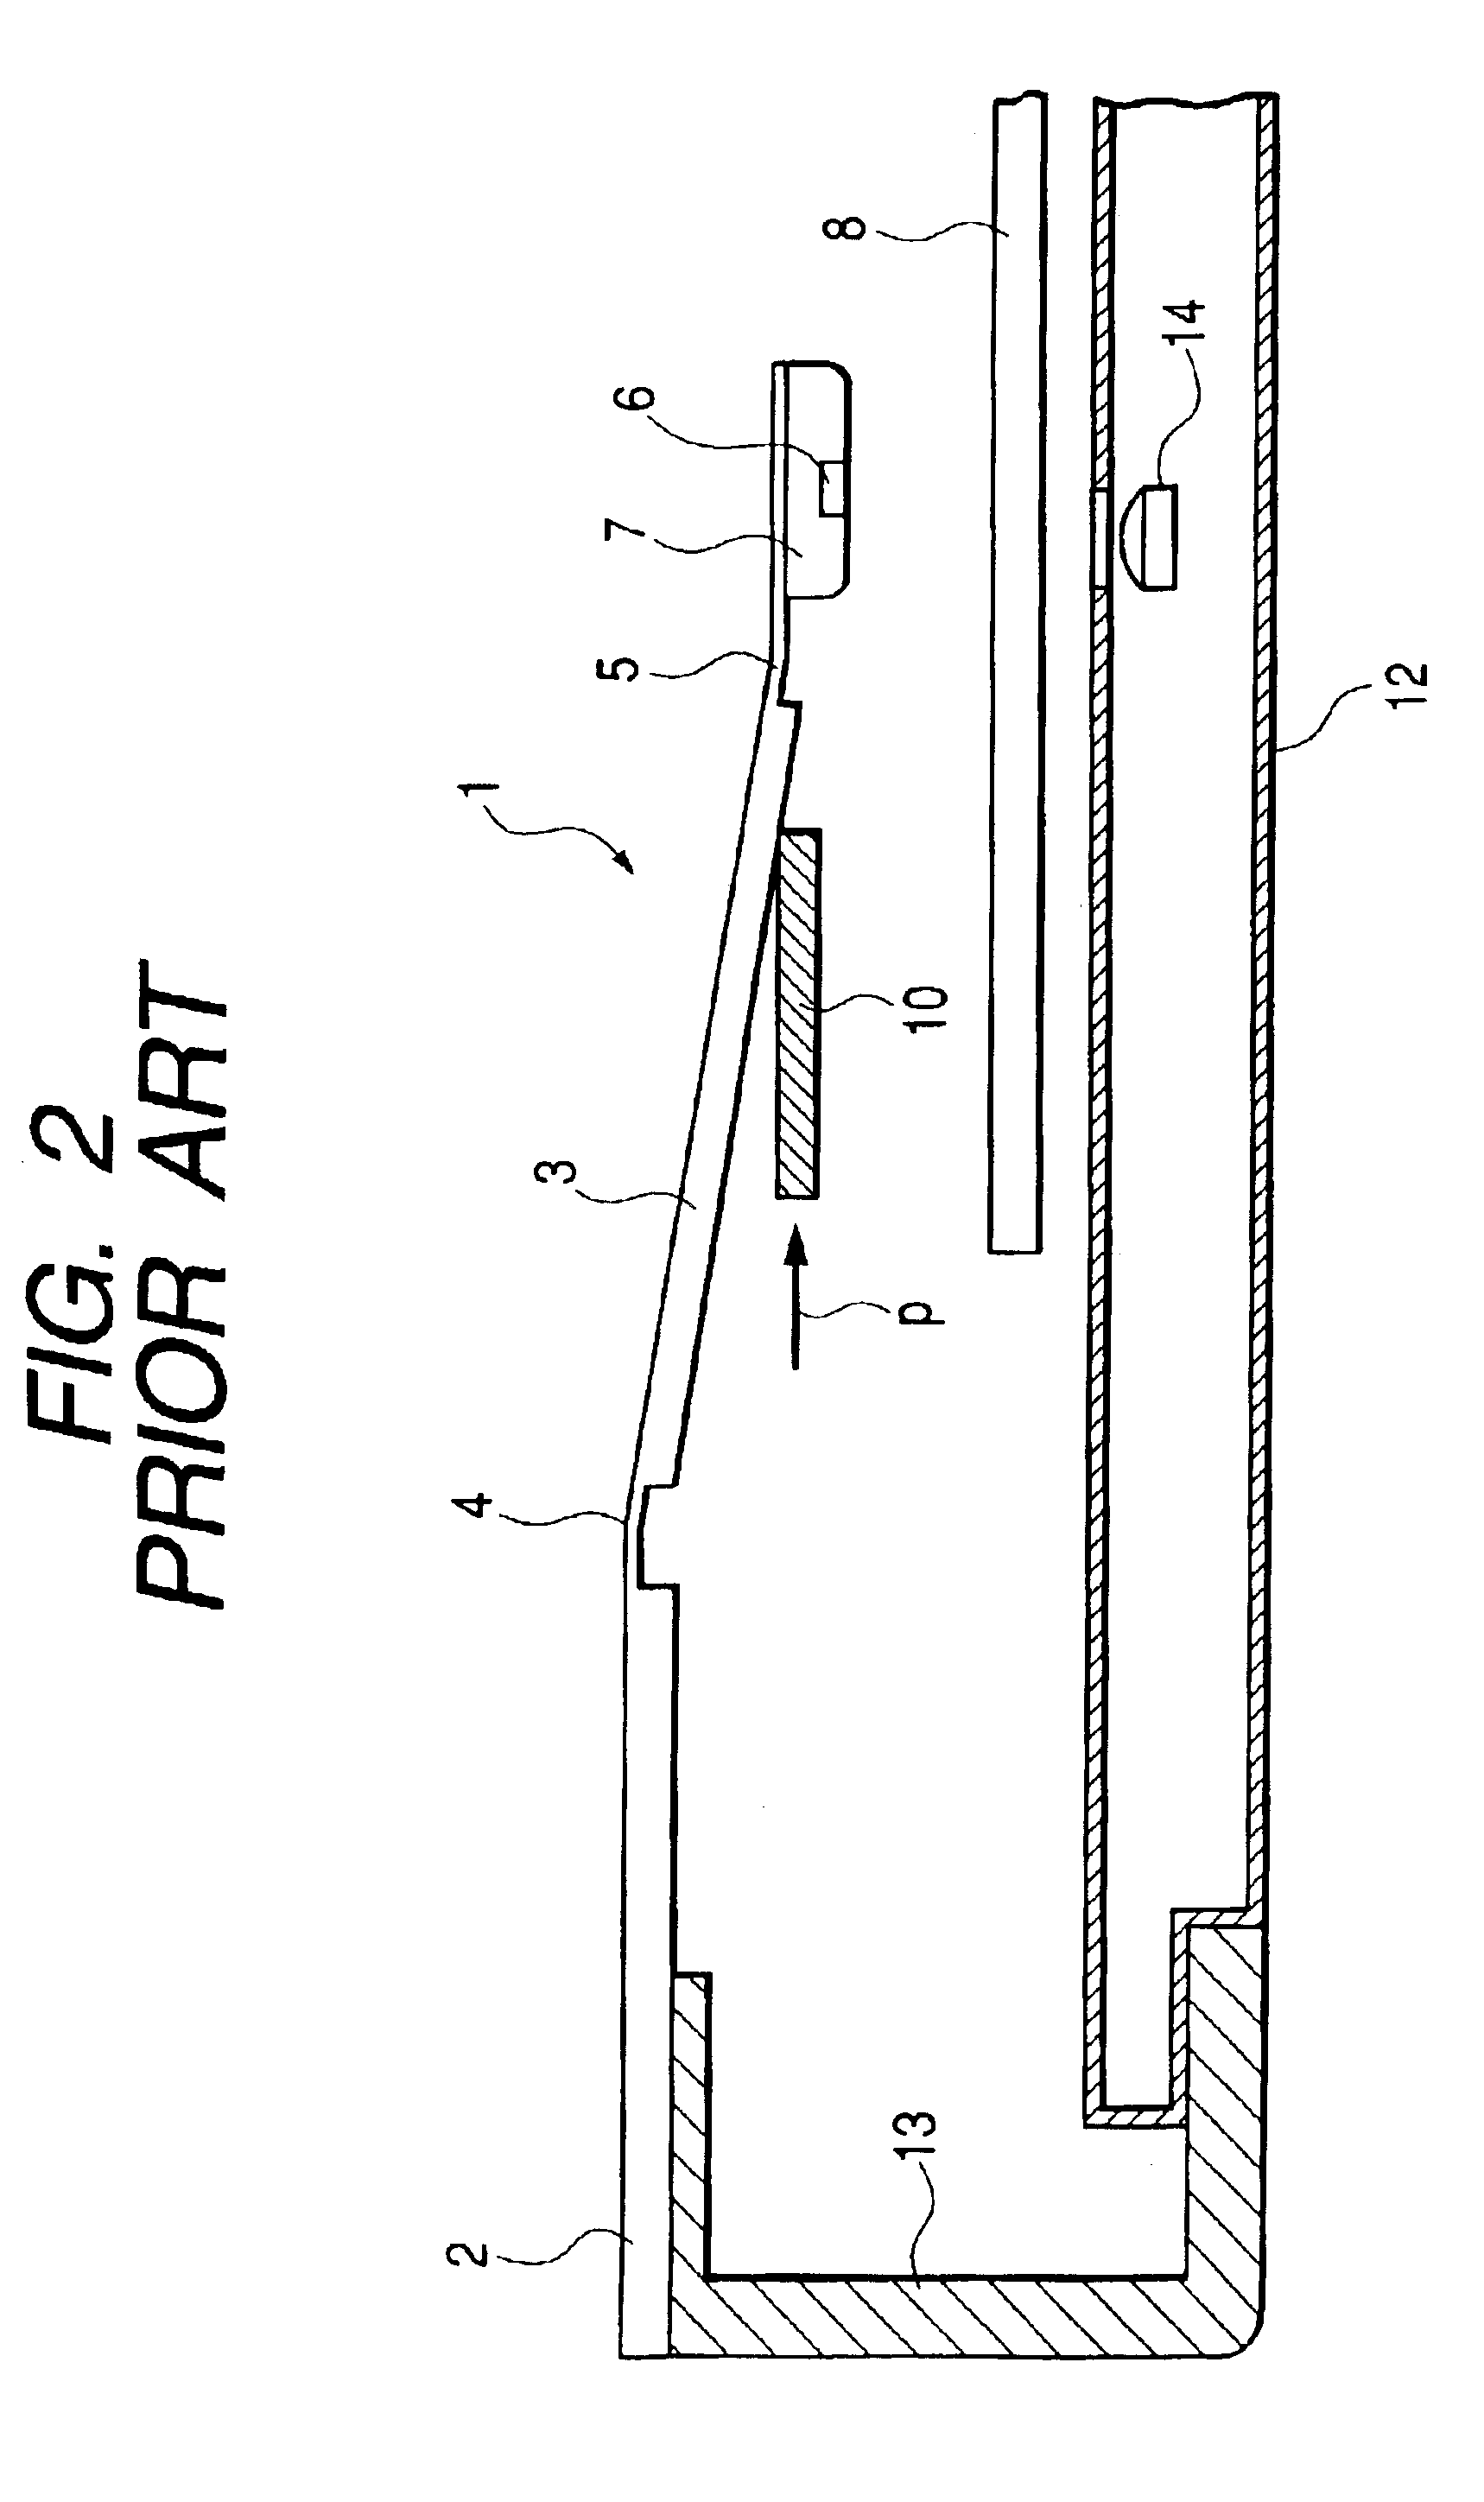 Magneto-optical recording apparatus having a magnetic head with a regulating member